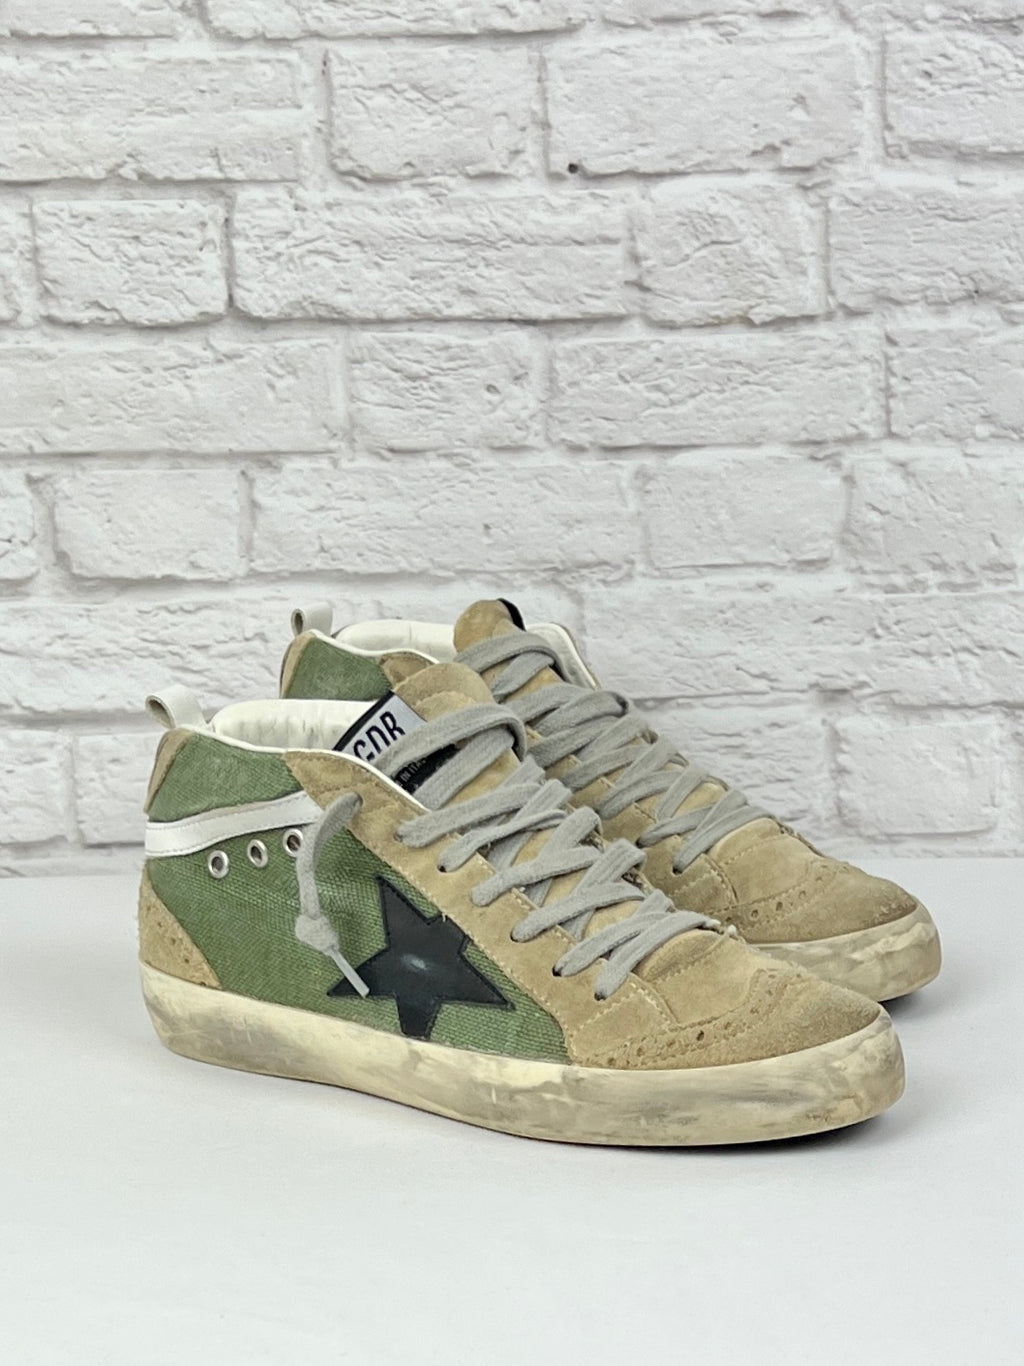 Golden Goose Mid Star Sneaker, Size 37,/US 7, Army Green